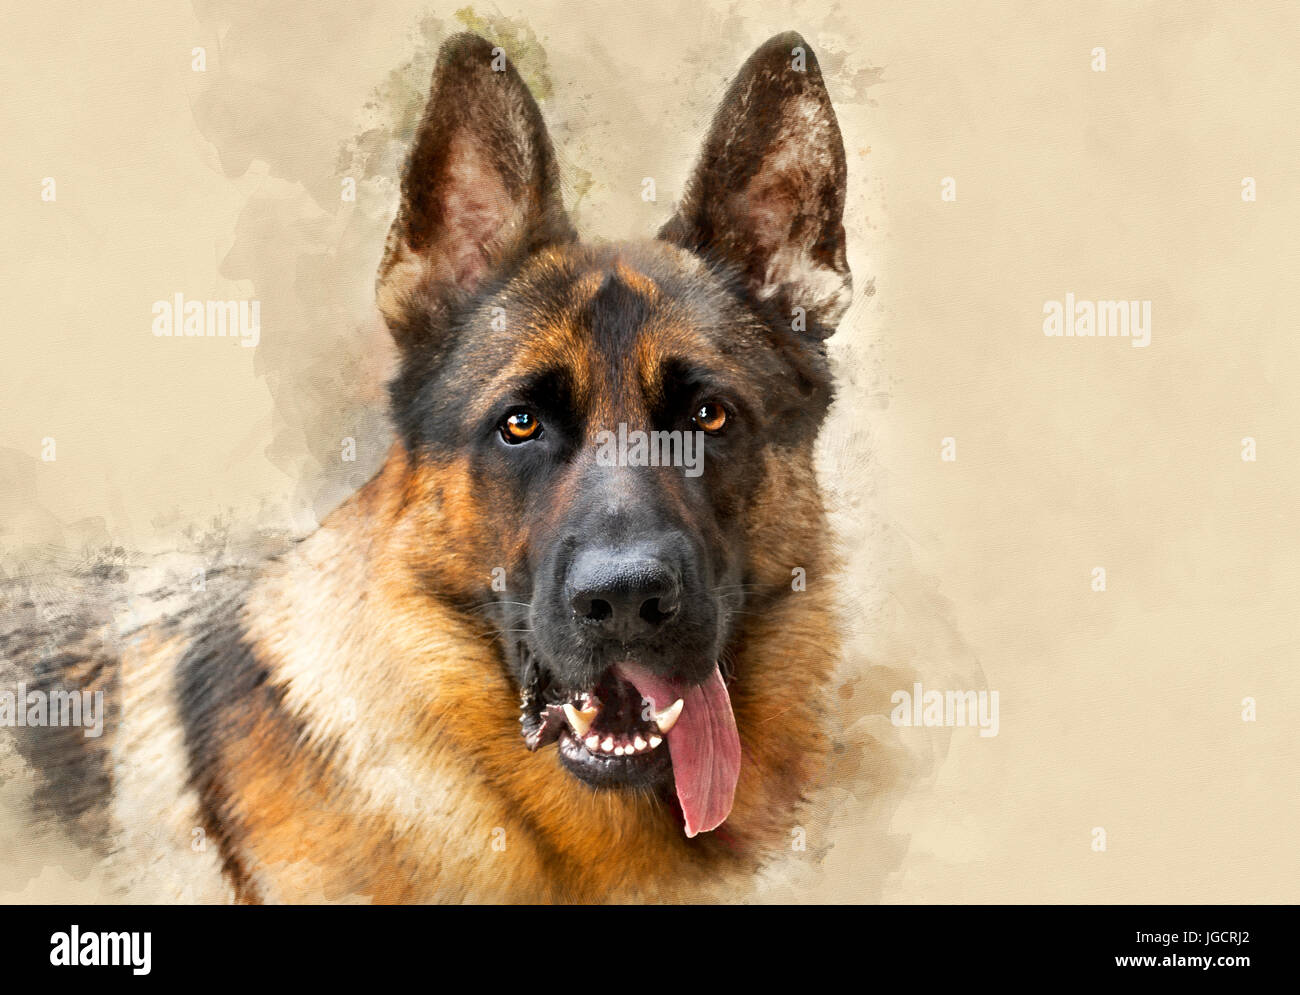 Portrait of a German shepherd dog with tongue hanging out Stock Photo